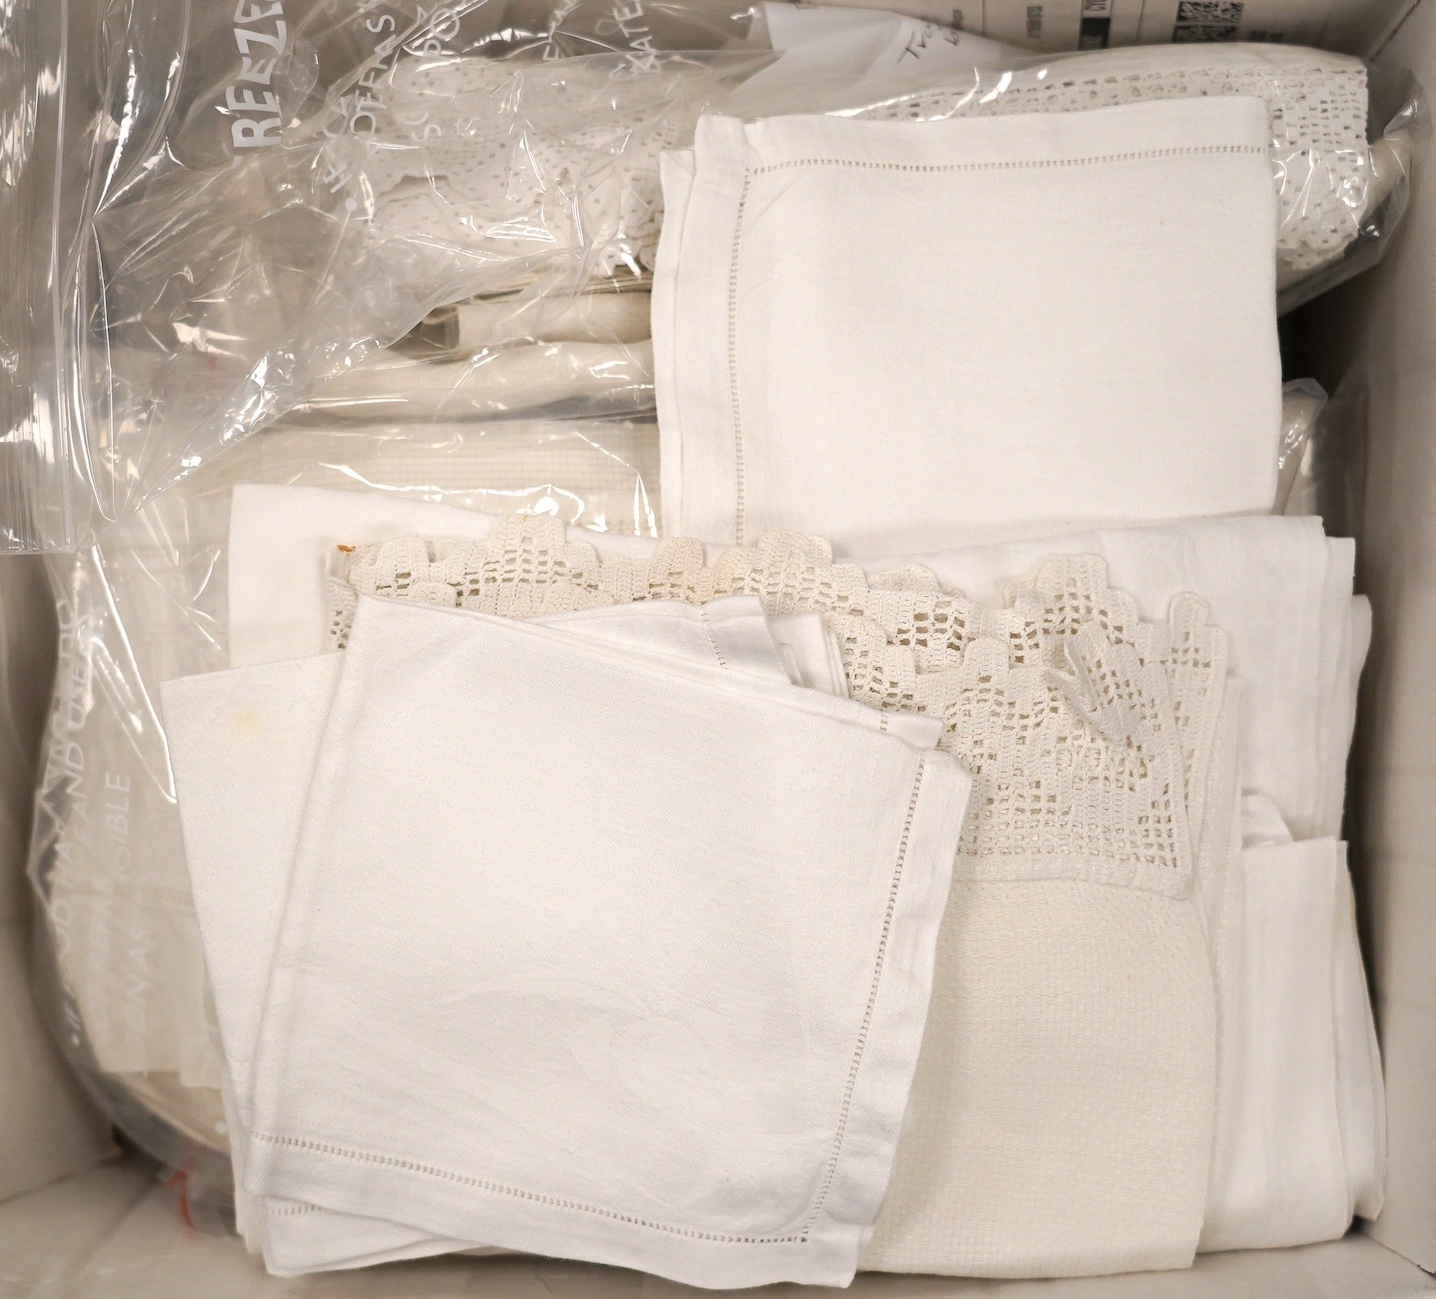 A collection of linen hand towels, table mats, etc. Condition - all laundered and appear in good condition